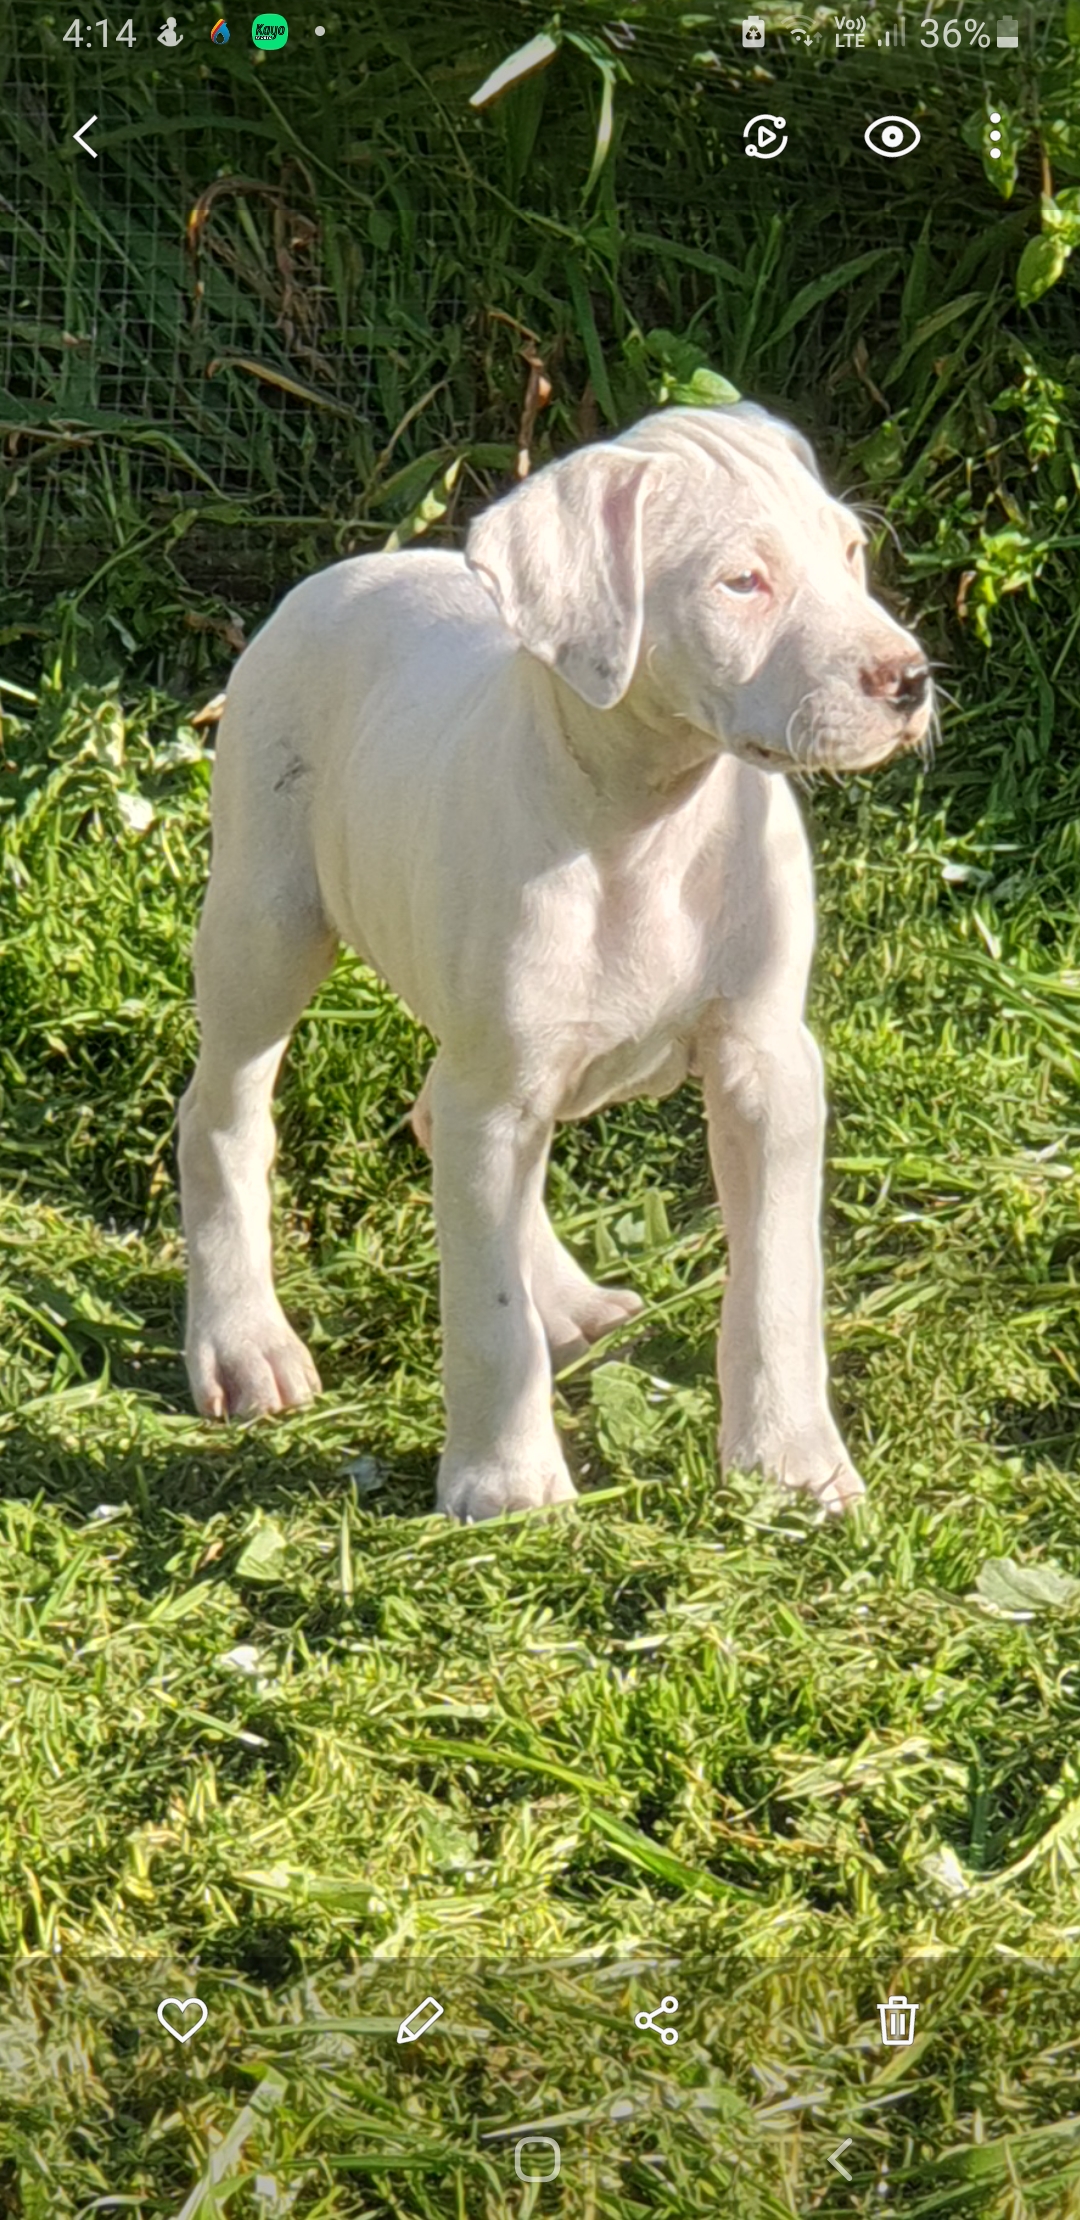 Bull Arab x GSP puppies looking for their forever home